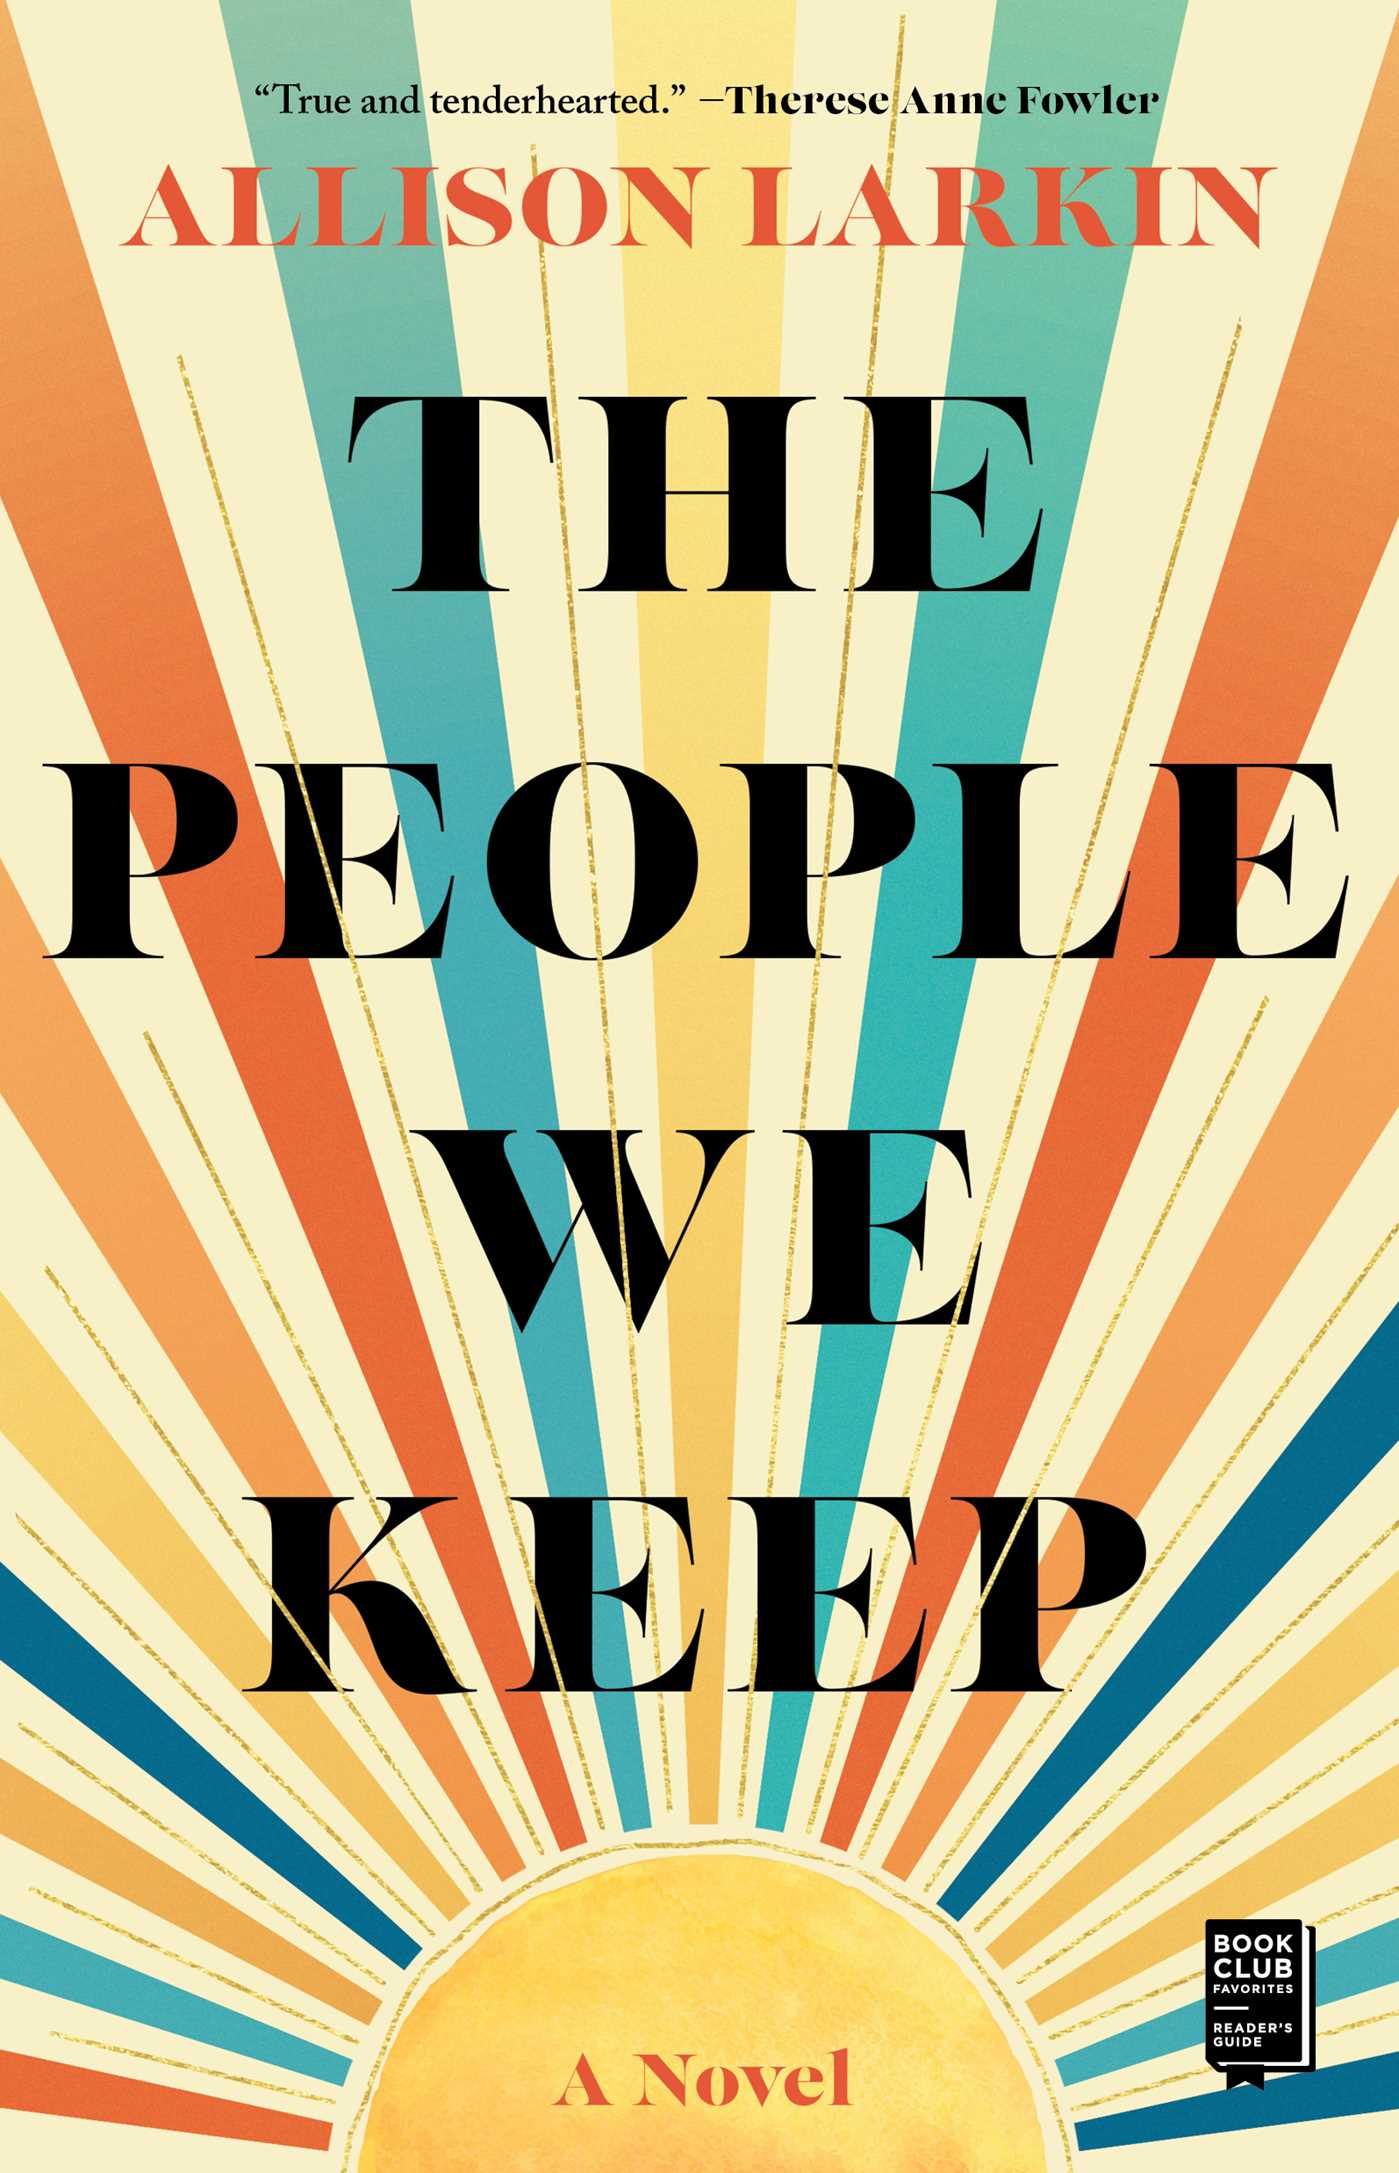 Choosing the Right Company: The People We Keep